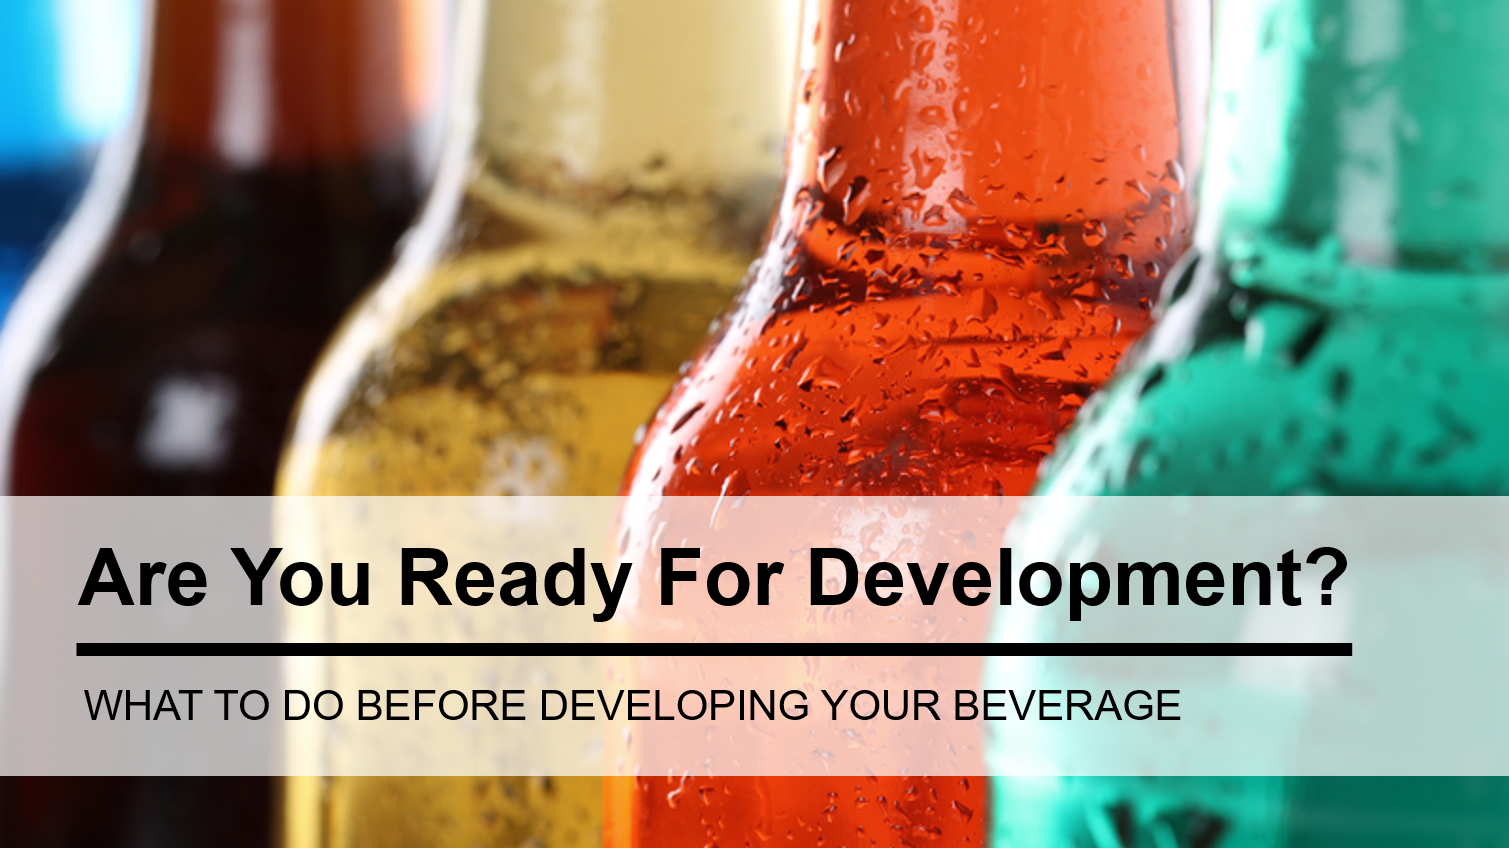 What To Do Before Beverage Development